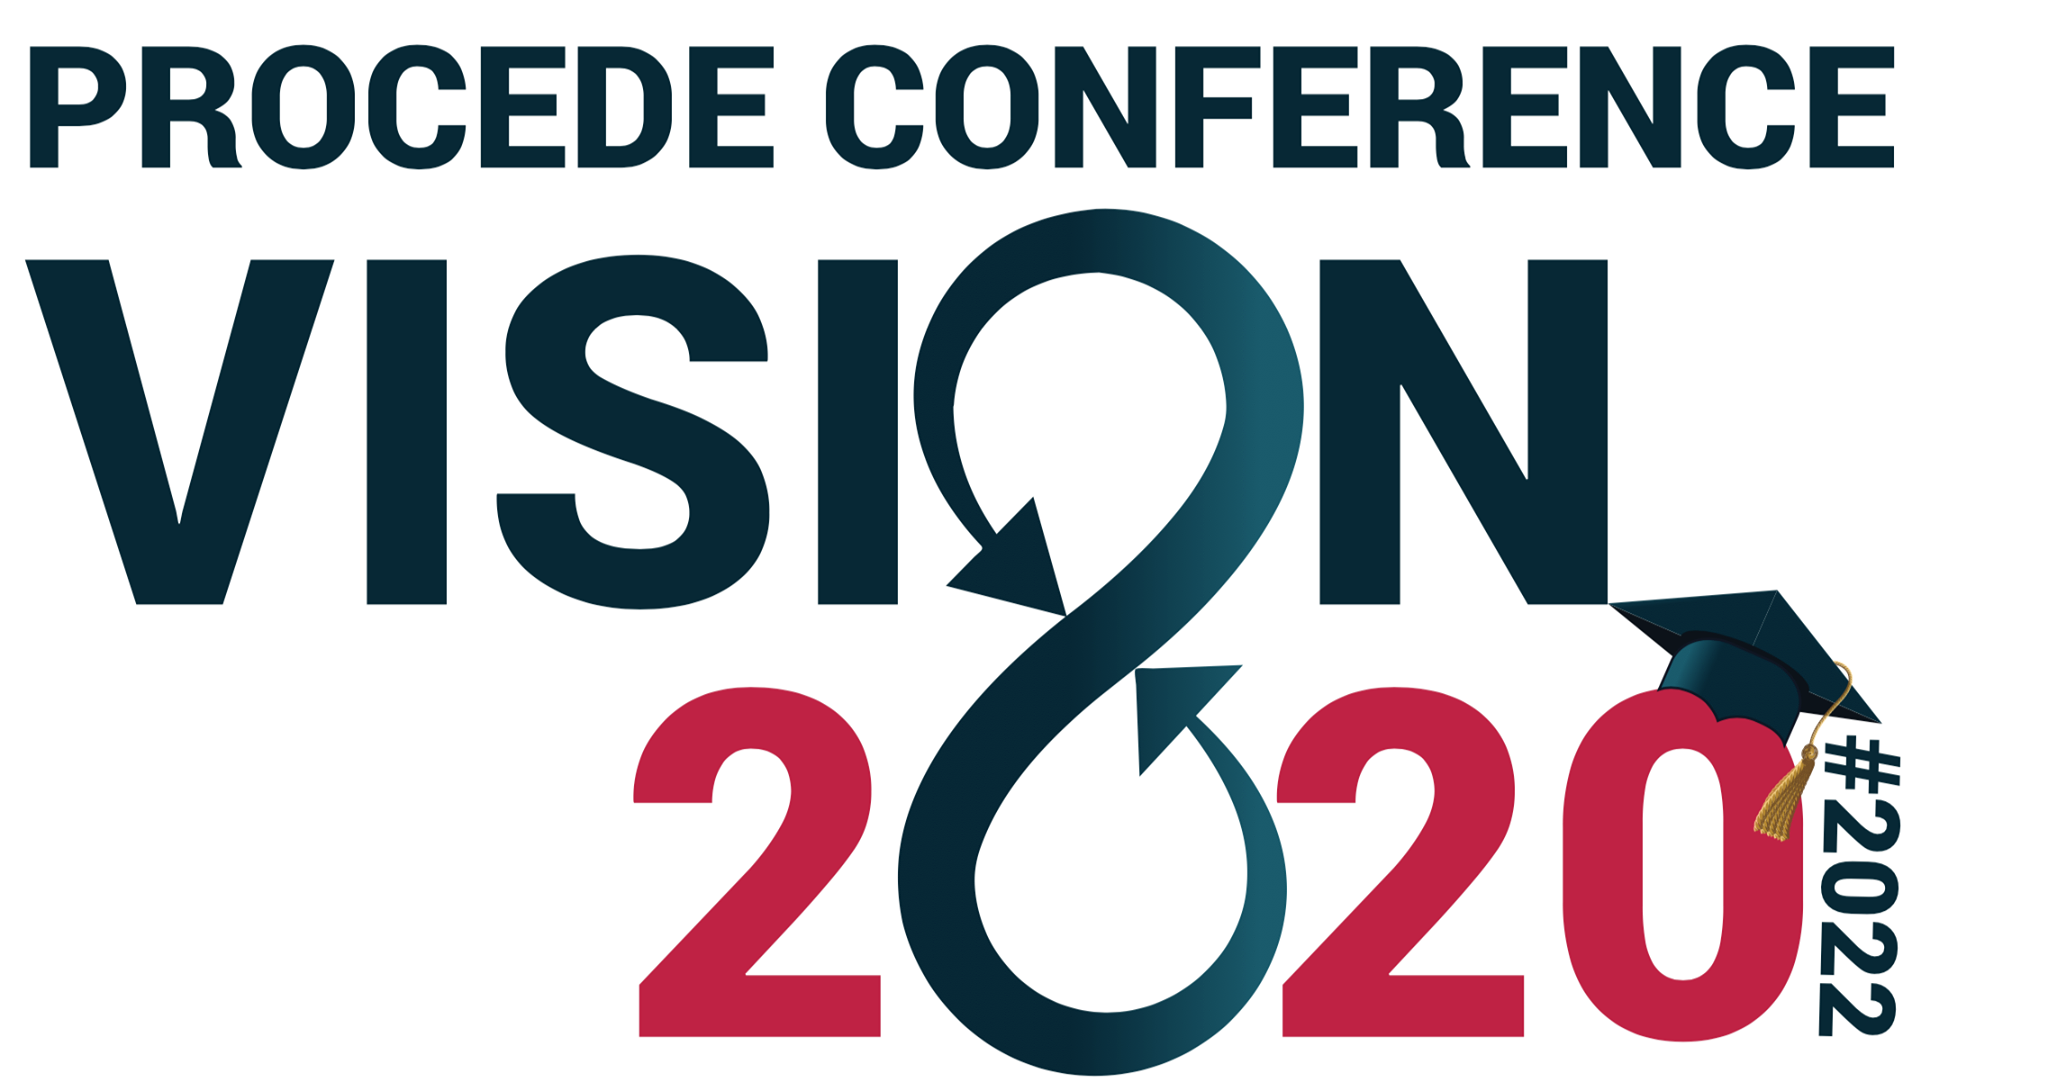 PROCEDE Conference 2022